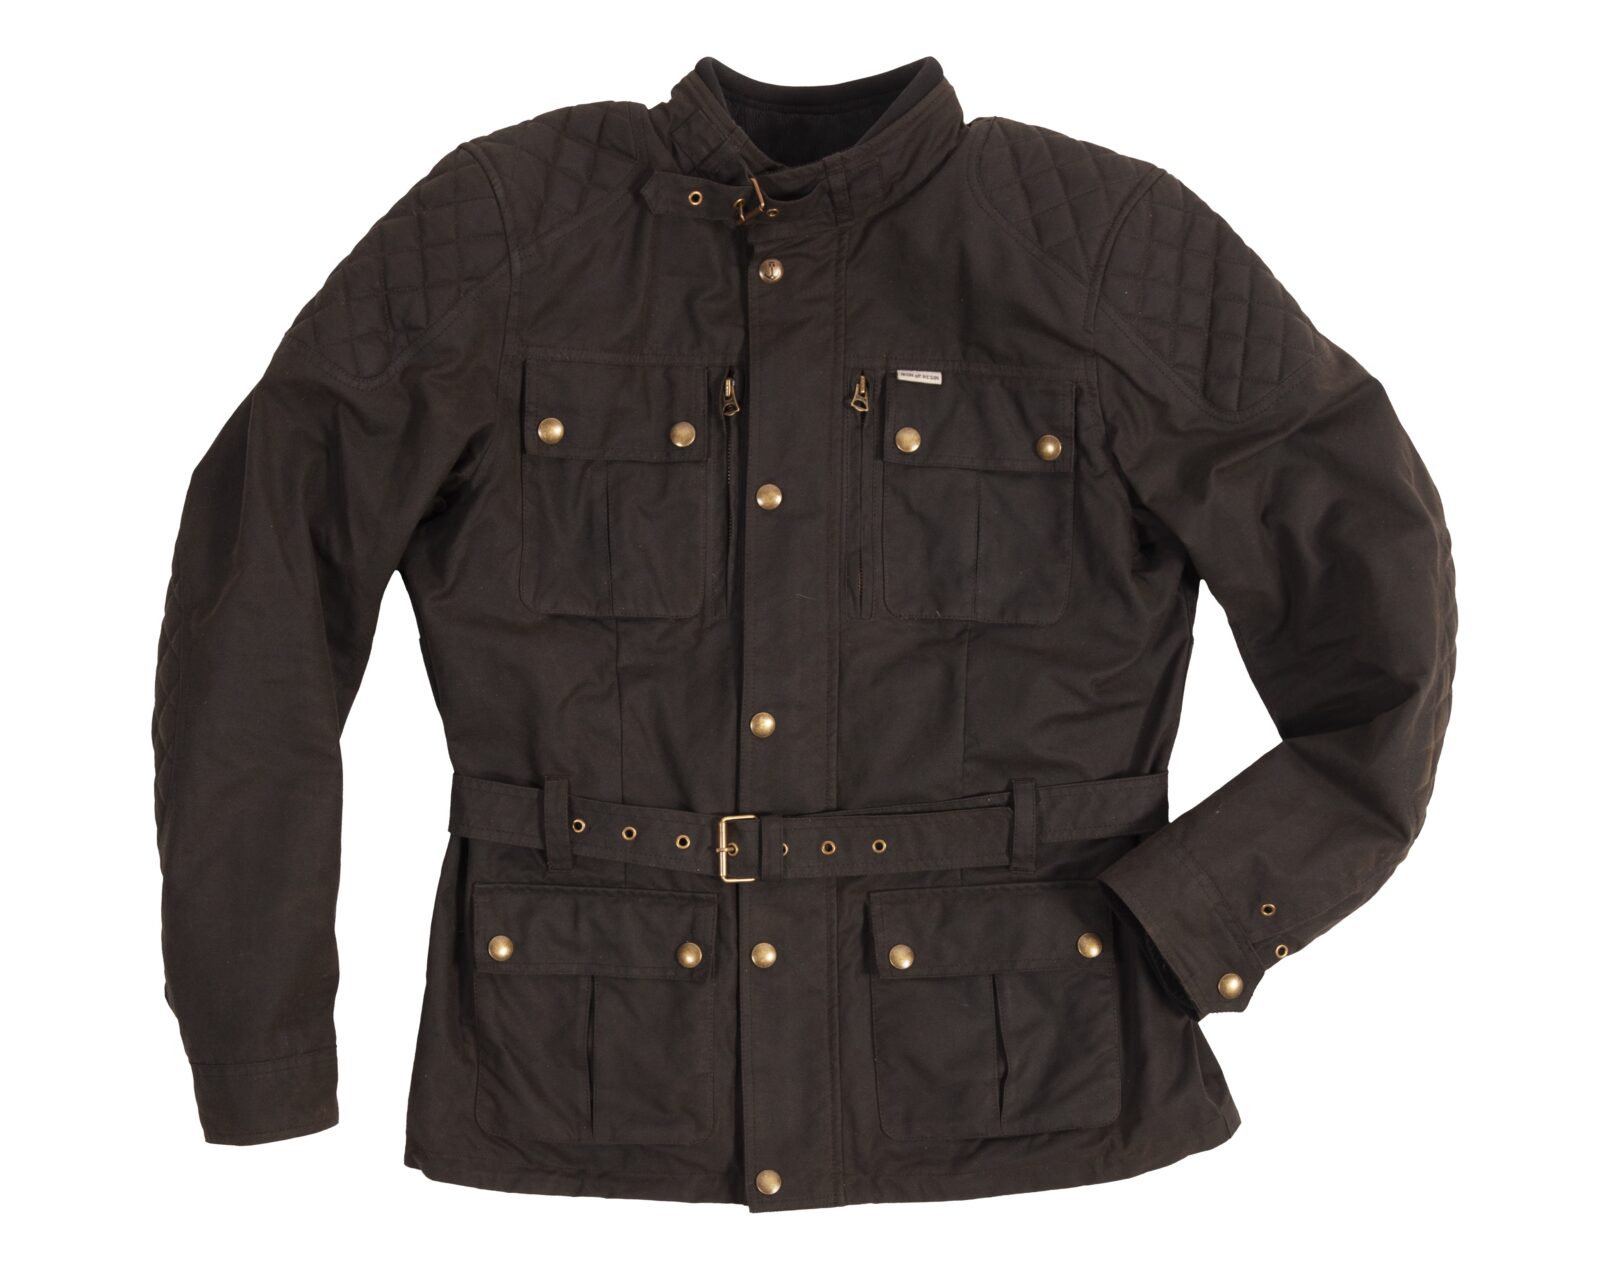 The New Enduro Jacket by Iron & Resin – A Classic Waxed Canvas ...